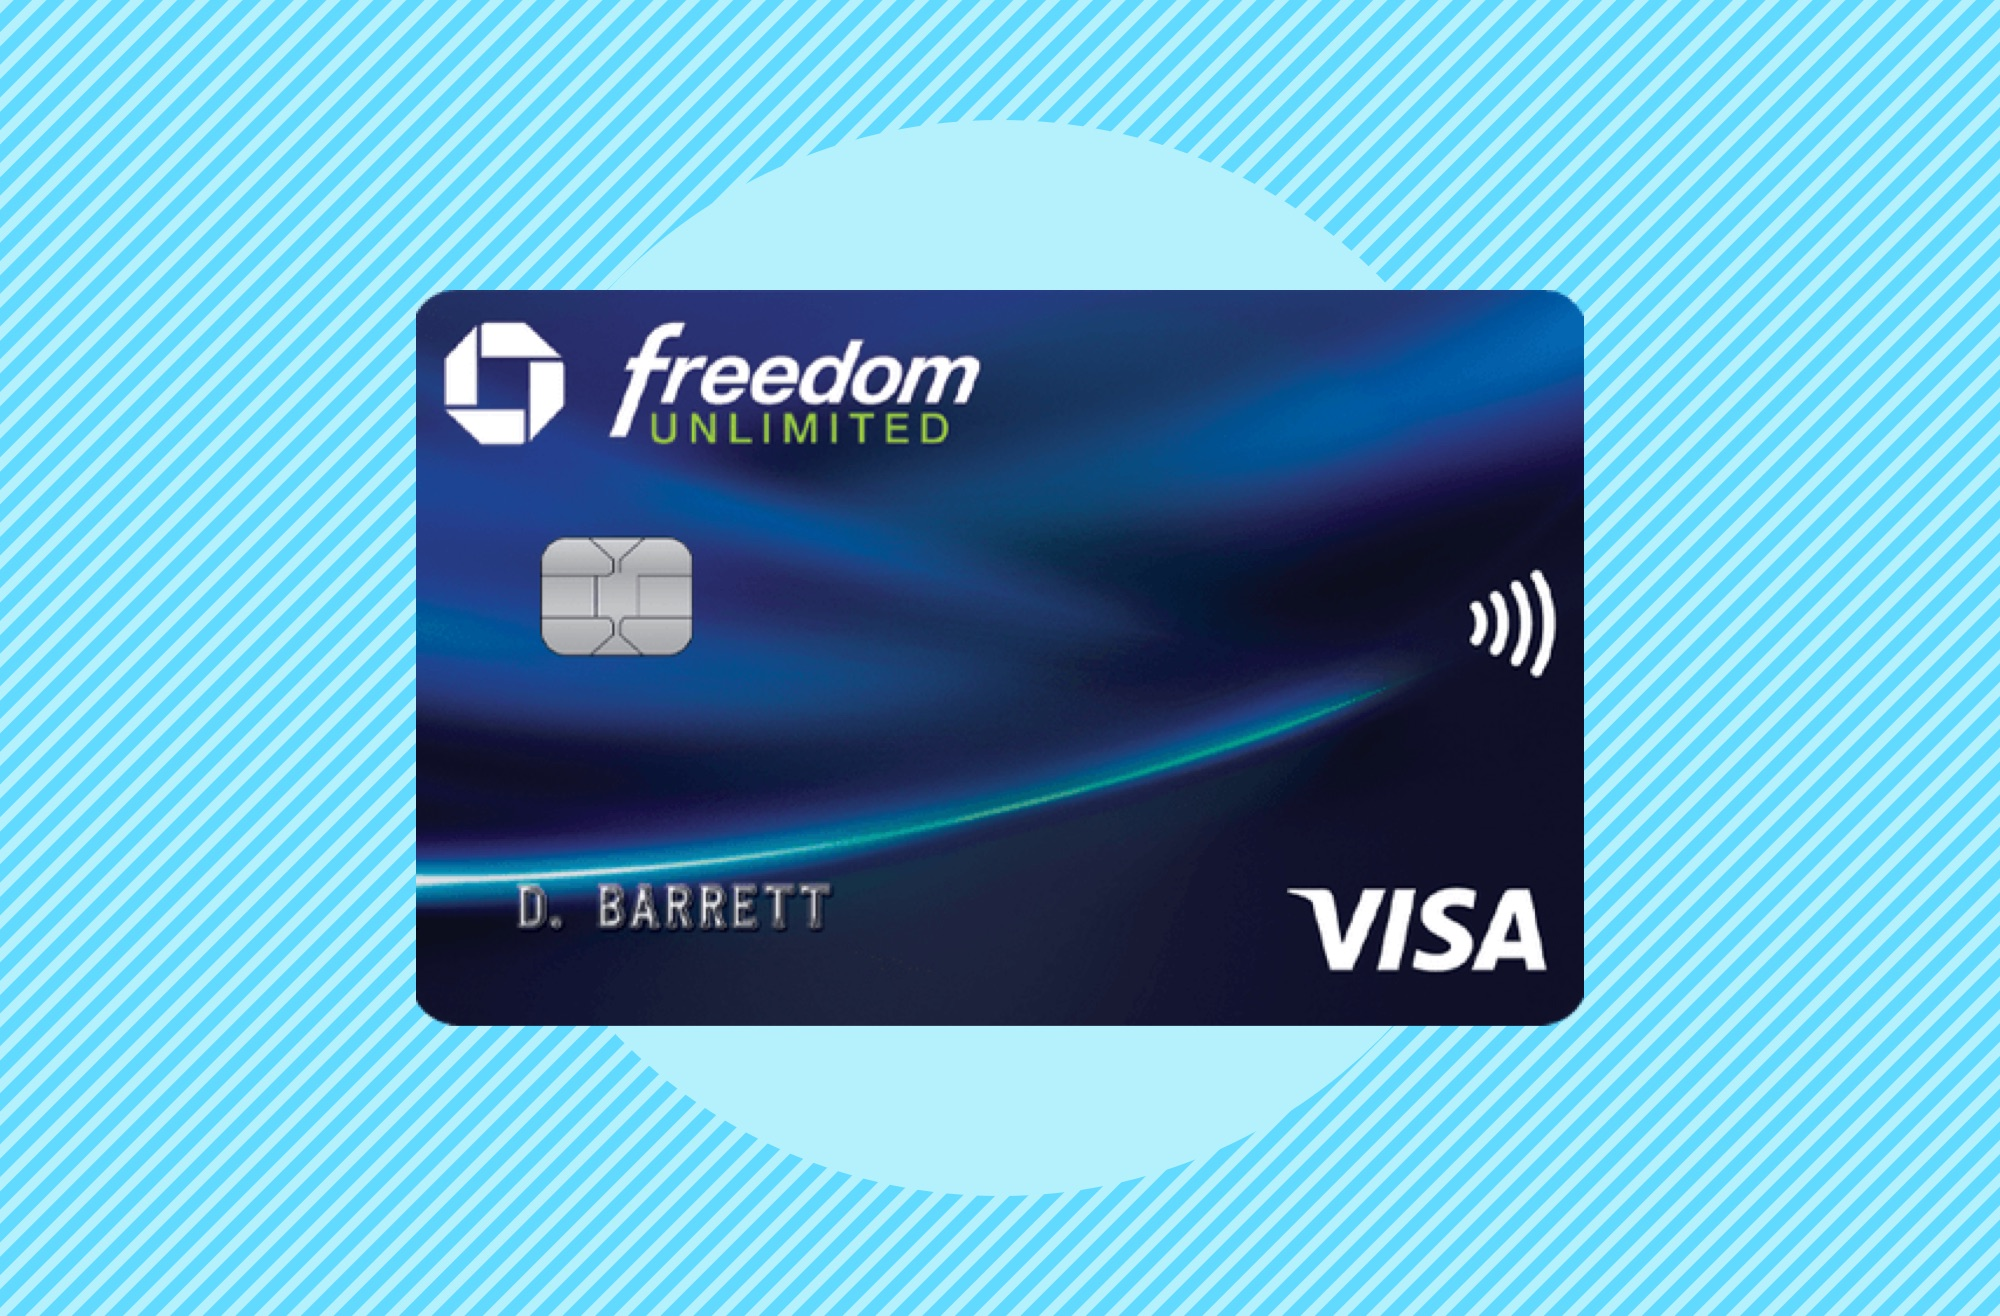 Learn how to apply for the Chase Freedom Unlimited® card